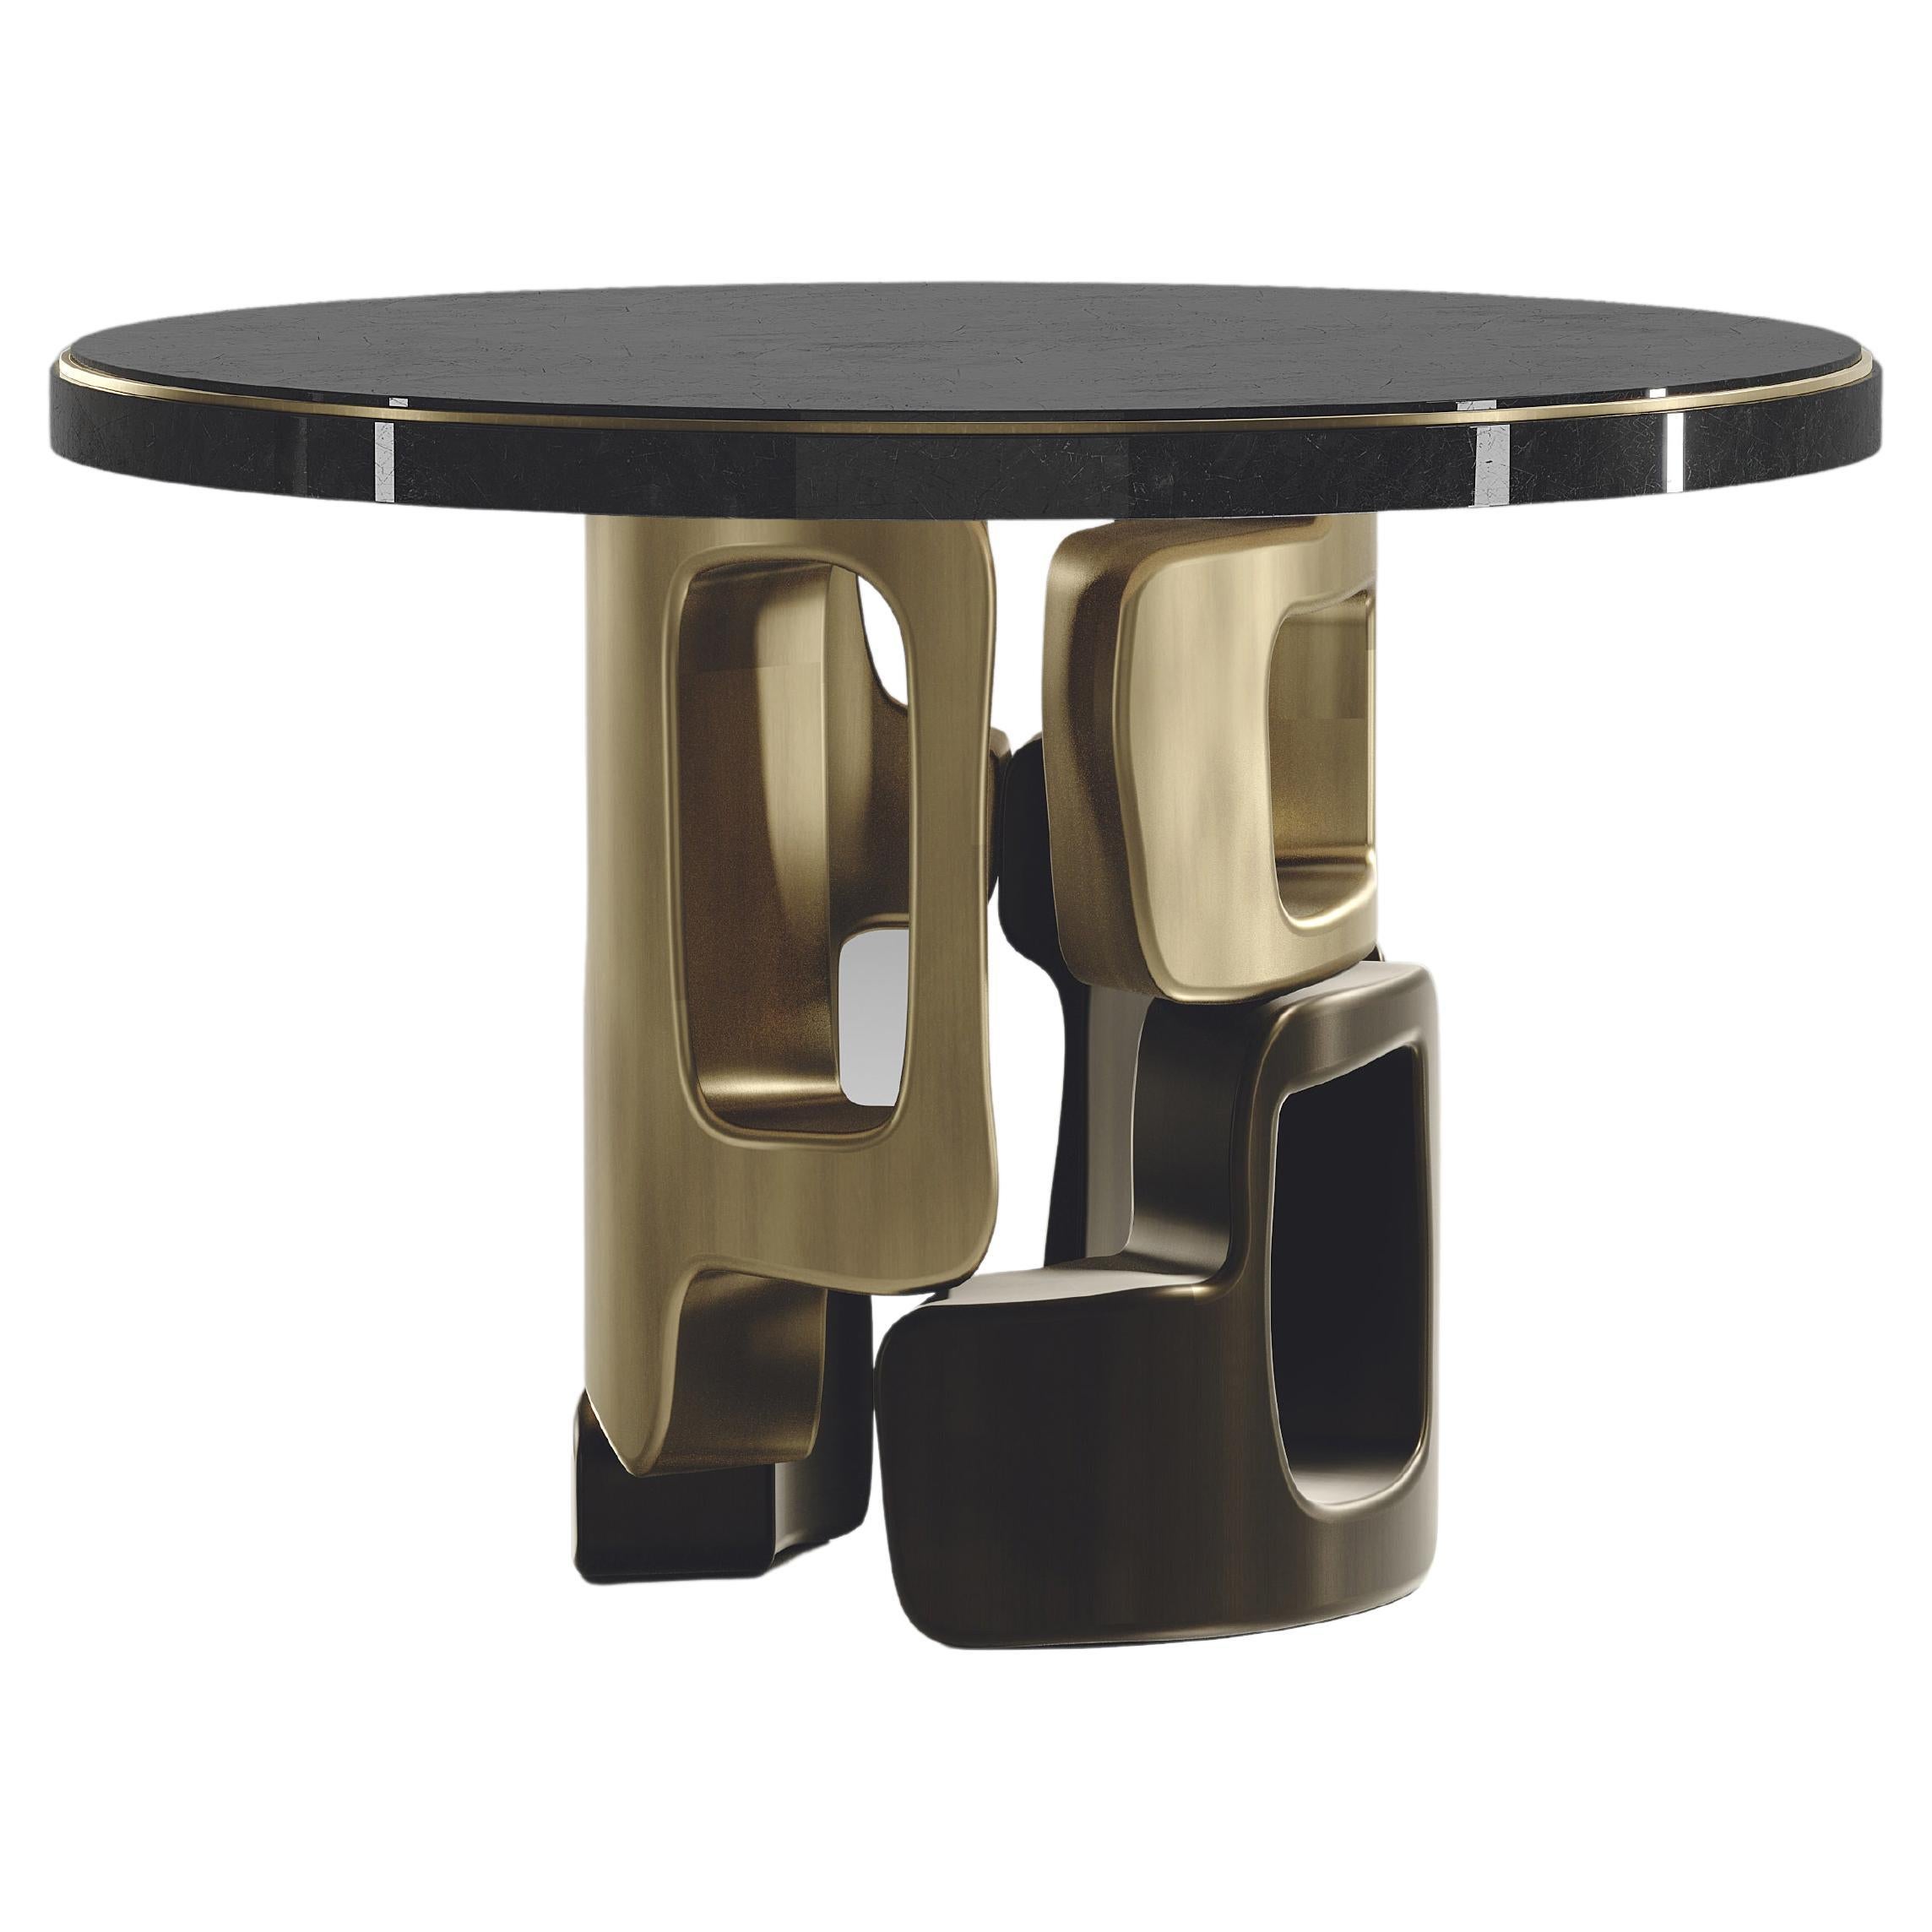 Shell Inlaid Breakfast Table with Bronze Patina Brass Details by Kifu Paris